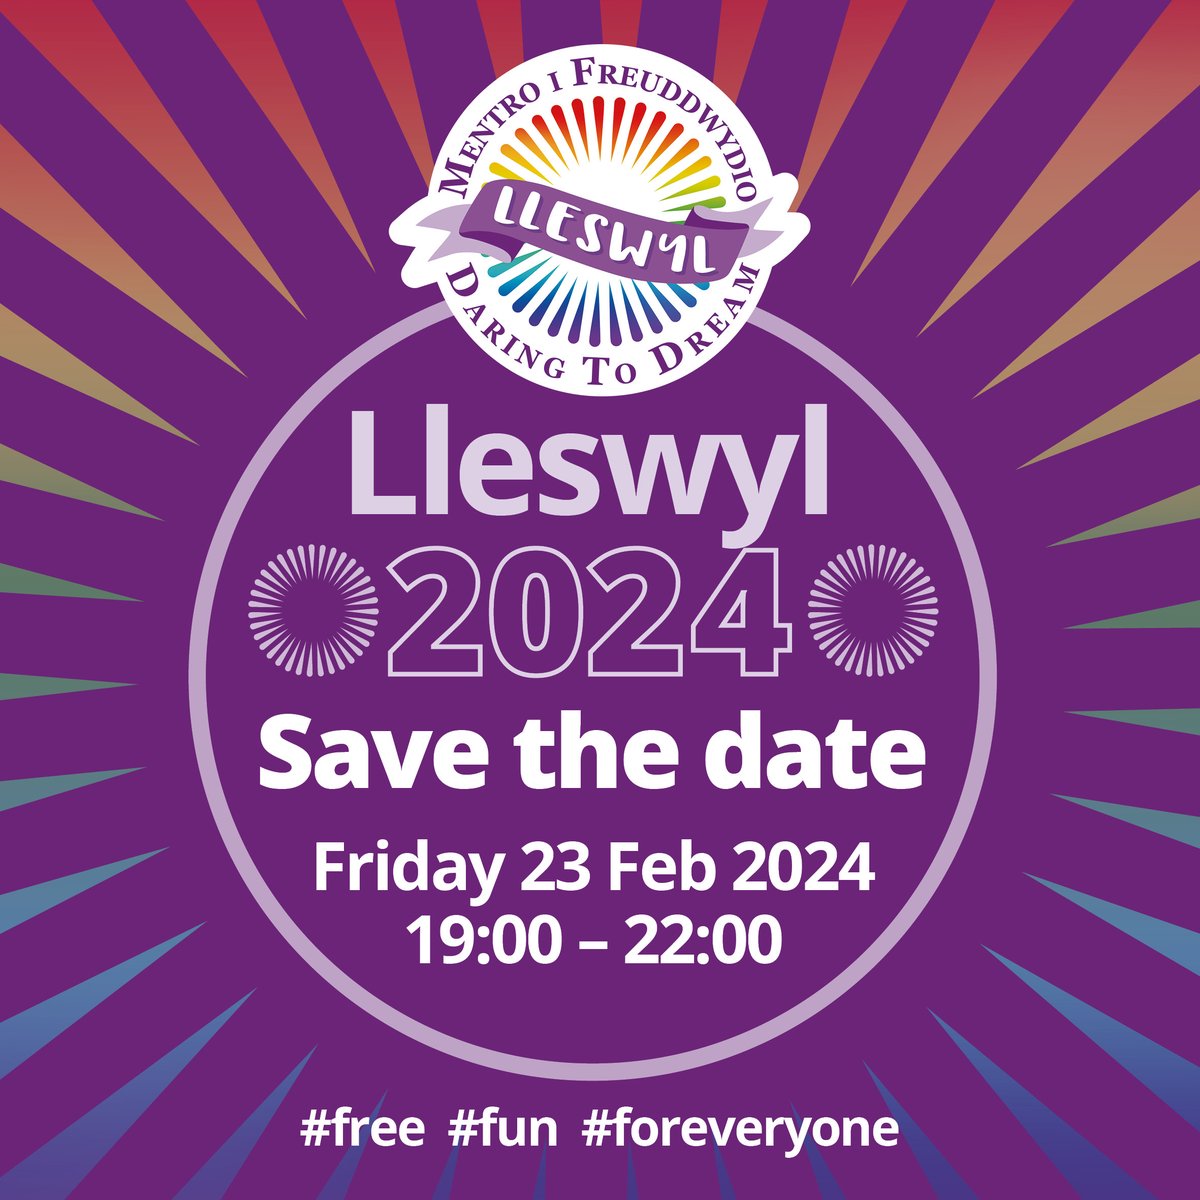 @radioglamorgan @jason_harrold @sianlloydnews @Skunkadelicuk - who would you recommend we try and include in Lleswyl 2024? Please get in touch!